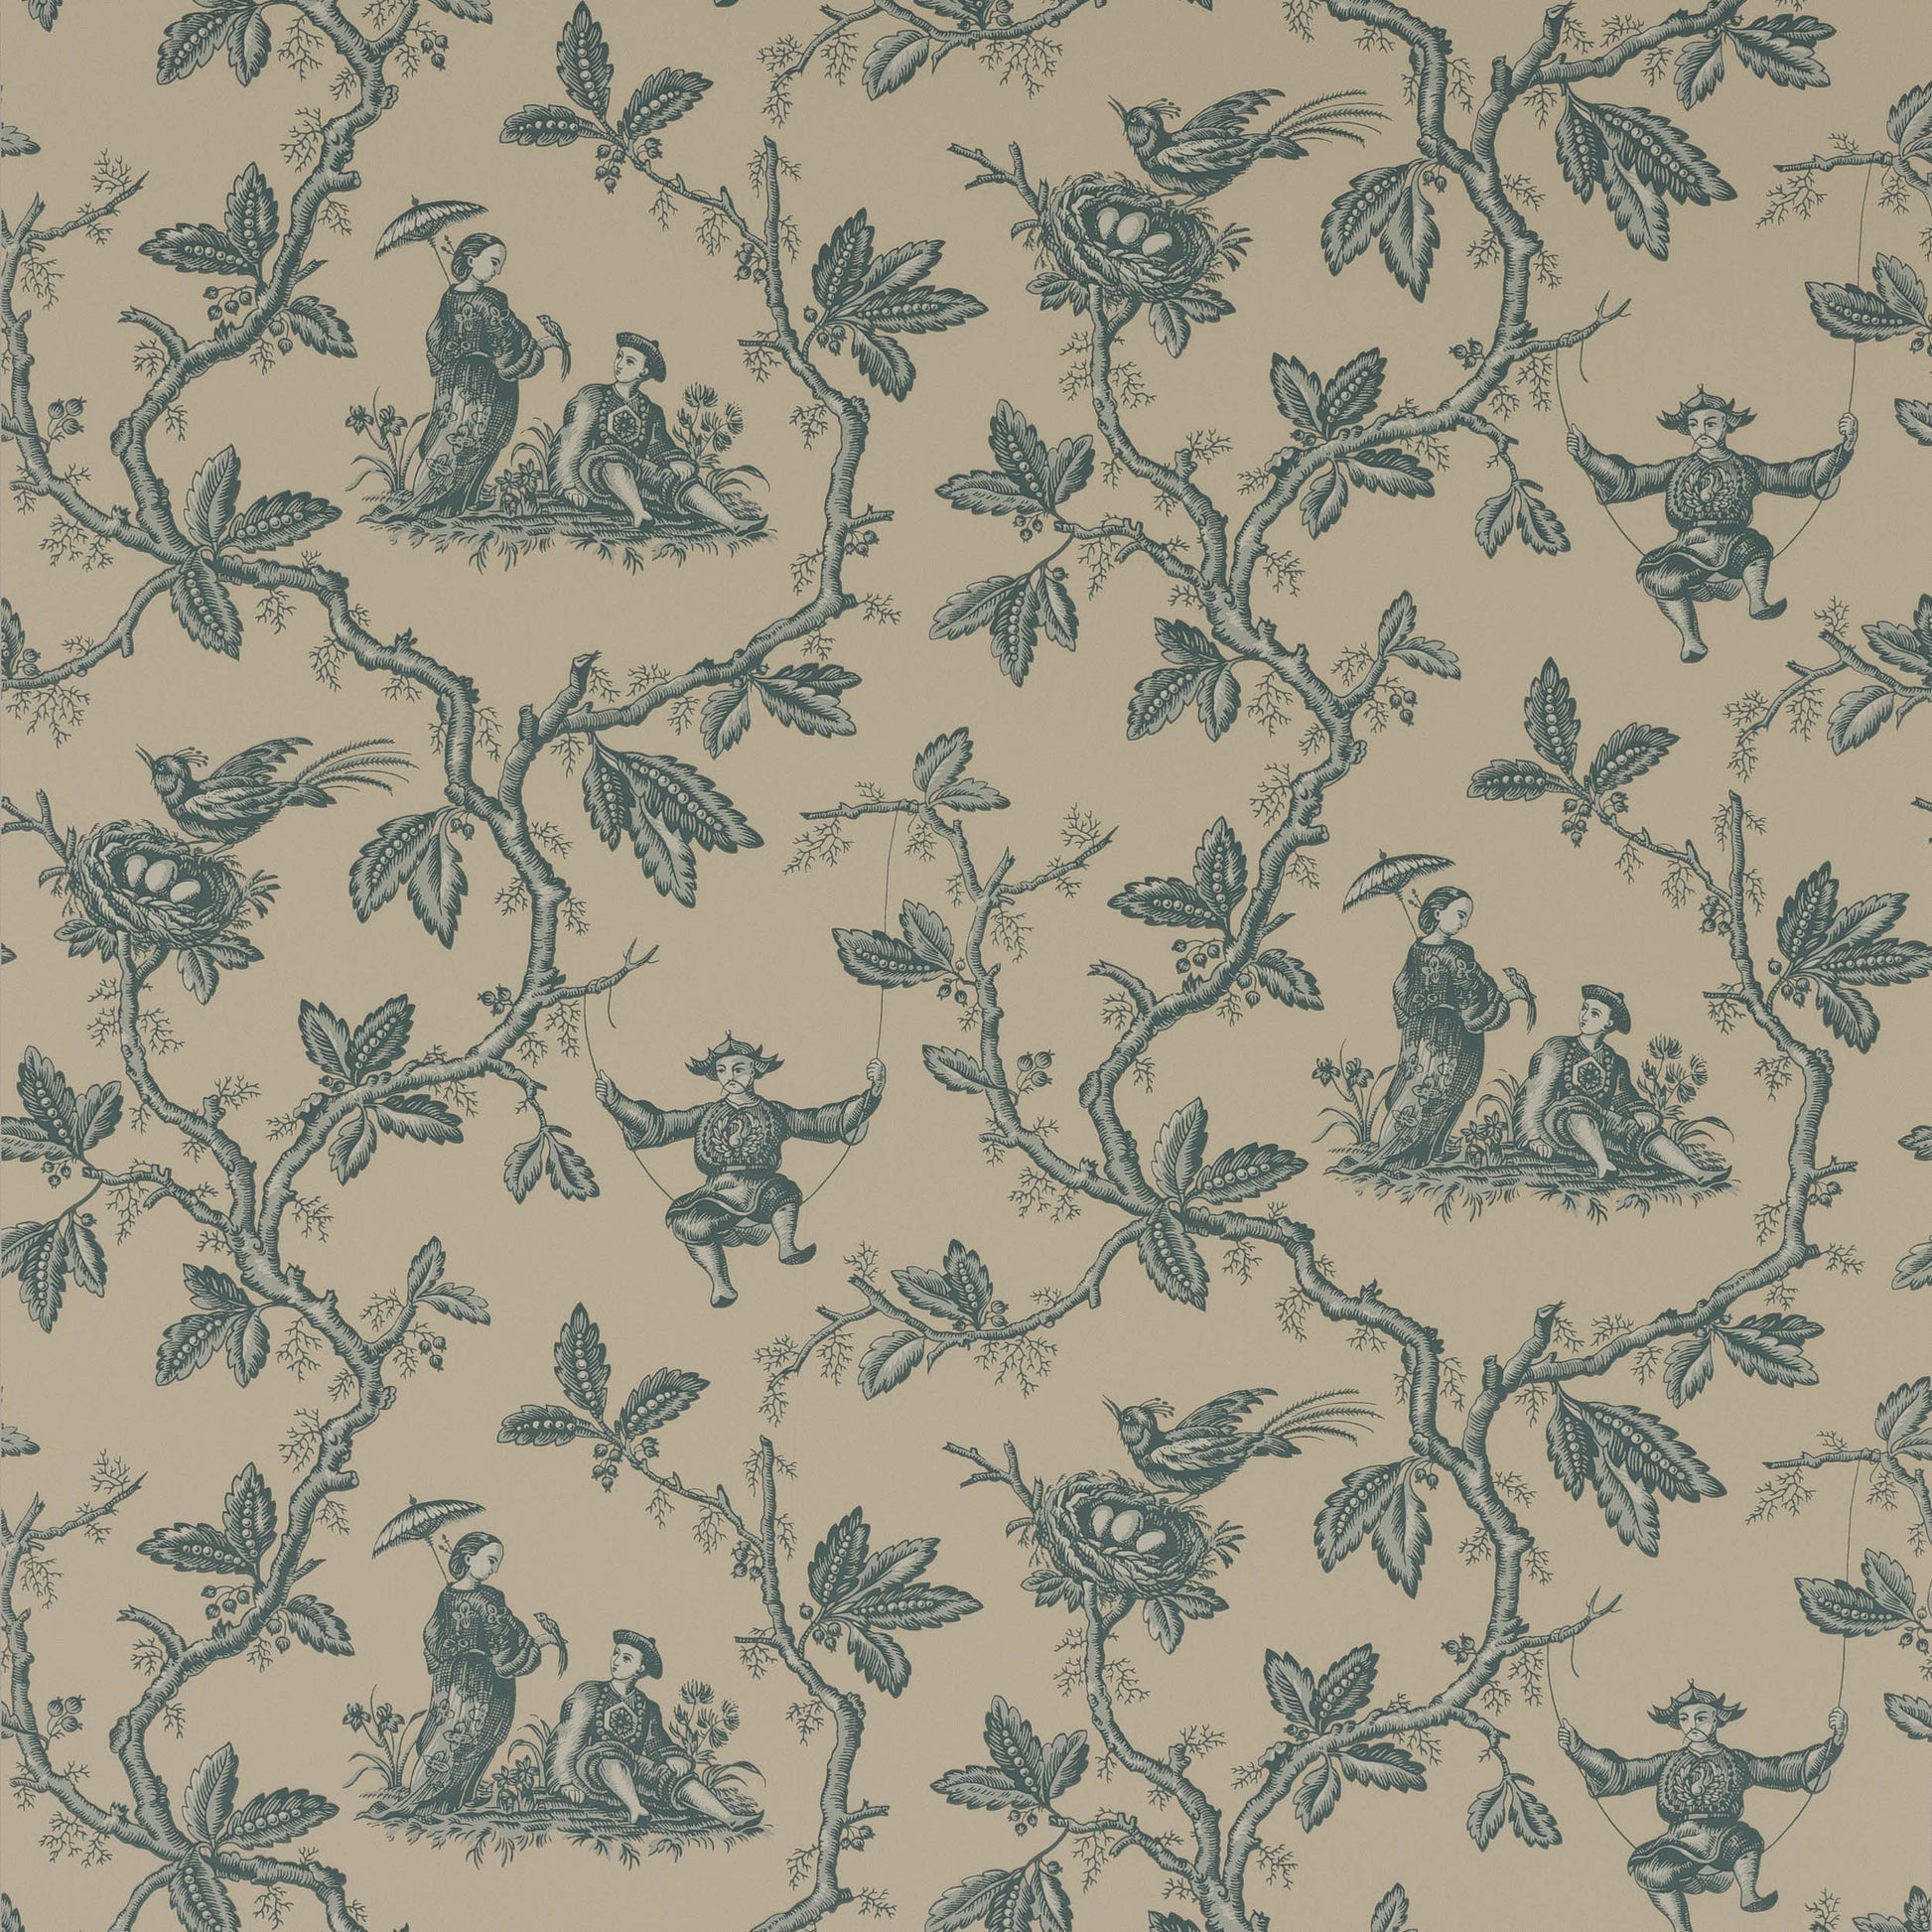 Toile Chinoise Wallpaper - Blue